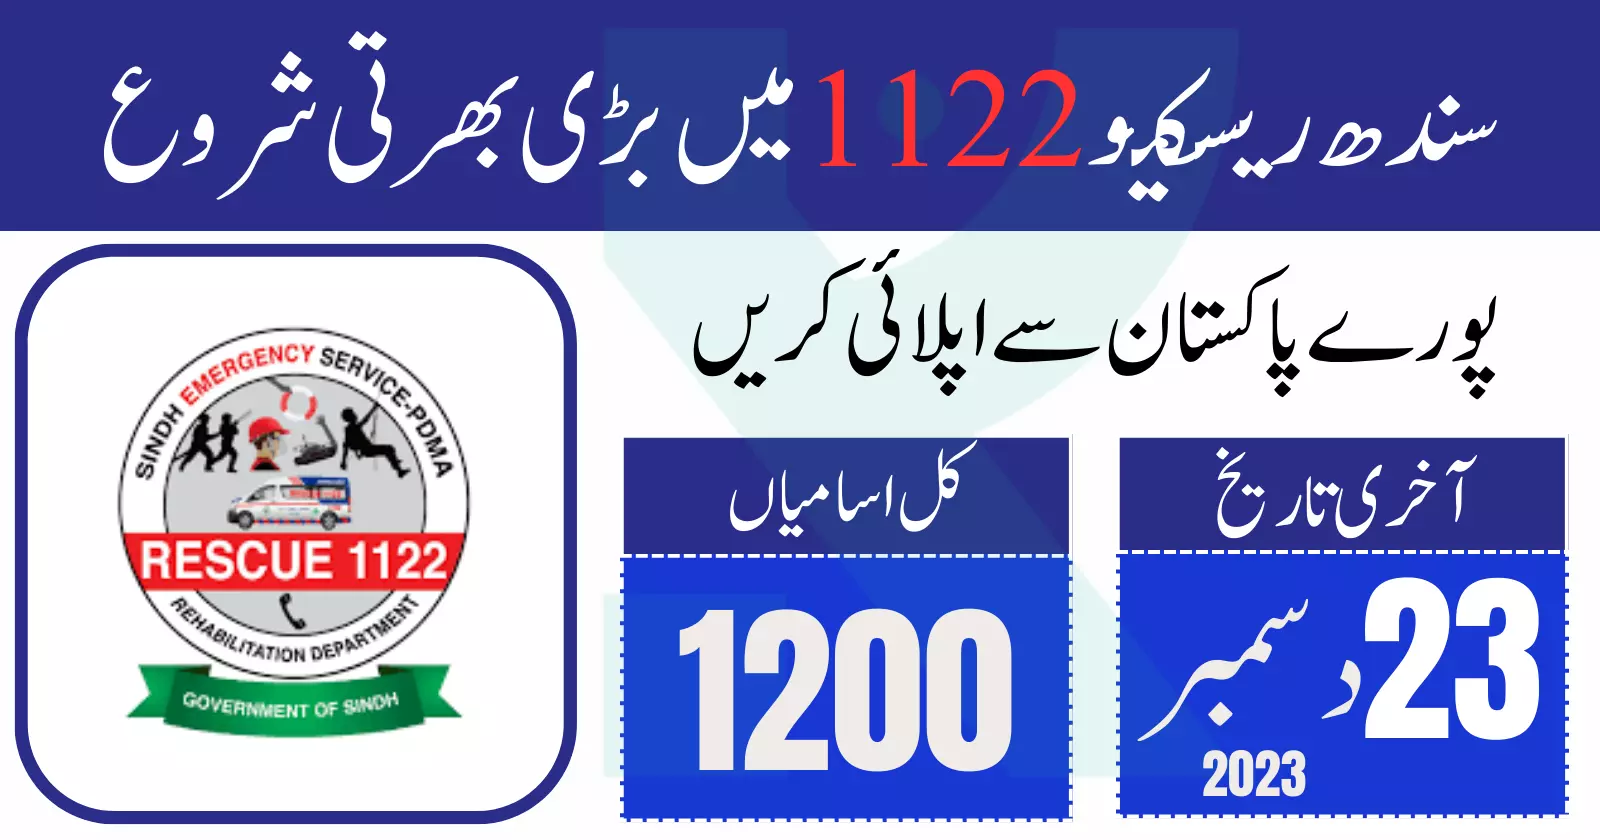 Sindh Rescue 1122 Hiring for 1200+ PTS Jobs in 2023 - Apply Now